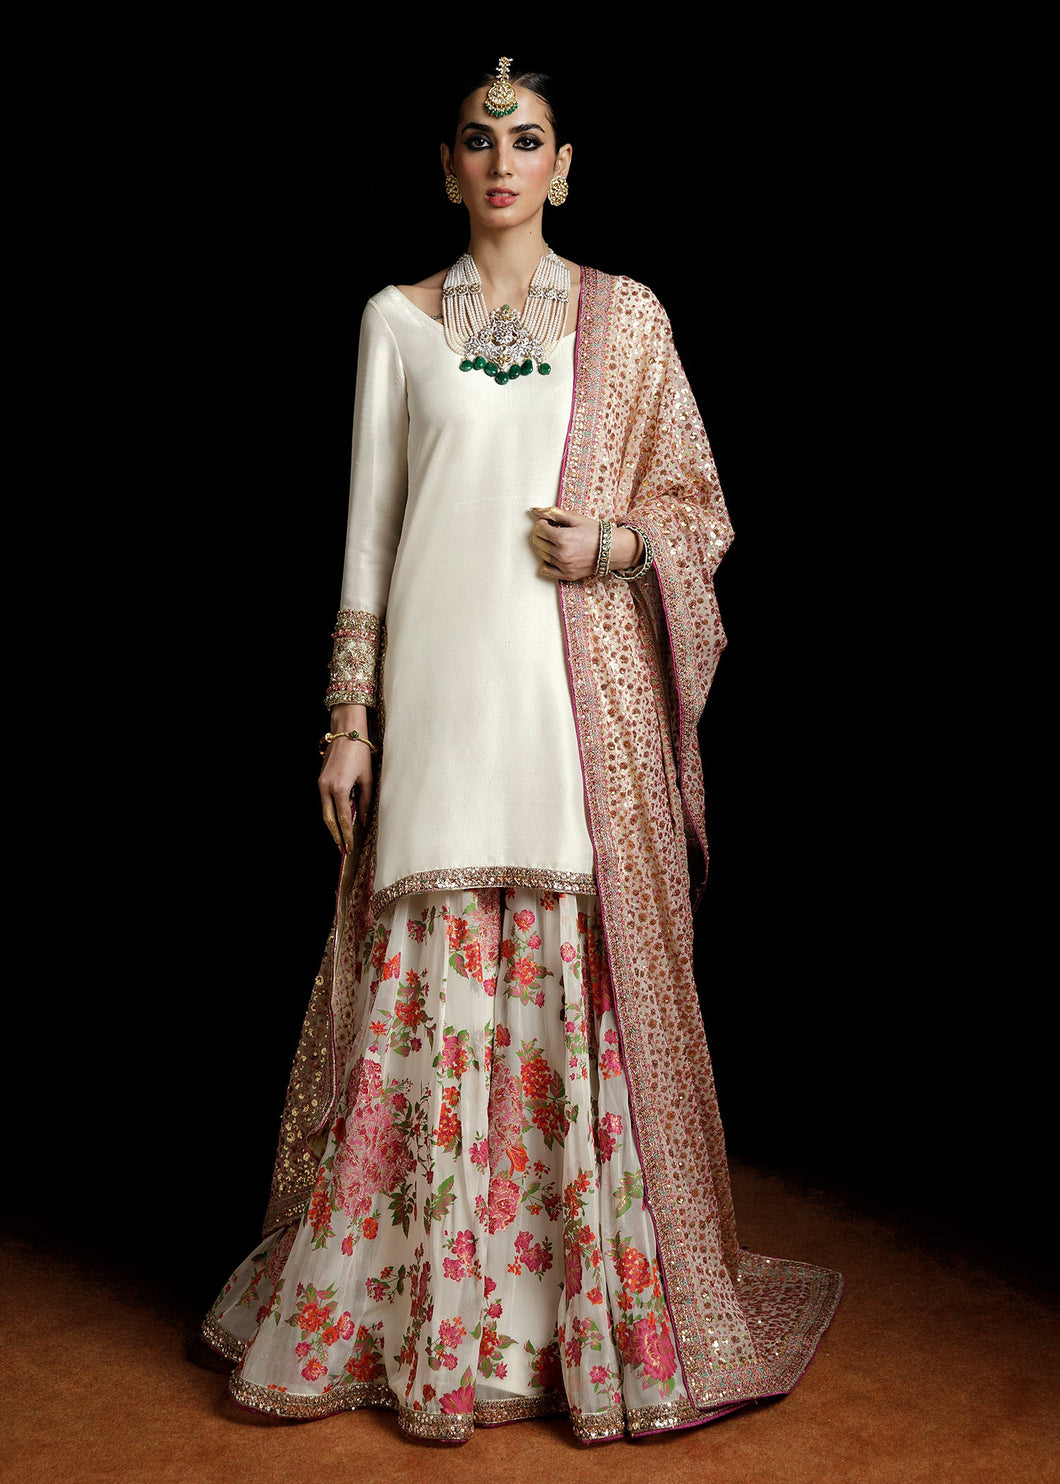 Buy New Coolection of HUSSAIN REHAR - LUXURY PRET'23 LEBAASONLINE Available on our website. We have exclusive variety of PAKISTANI DRESSES ONLINE. This wedding season get your unstitched or customized dresses from our PAKISTANI BOUTIQUE ONLINE. PAKISTANI DRESSES IN UK, USA, UAE, QATAR, DUBAI Lebaasonline at SALE price!